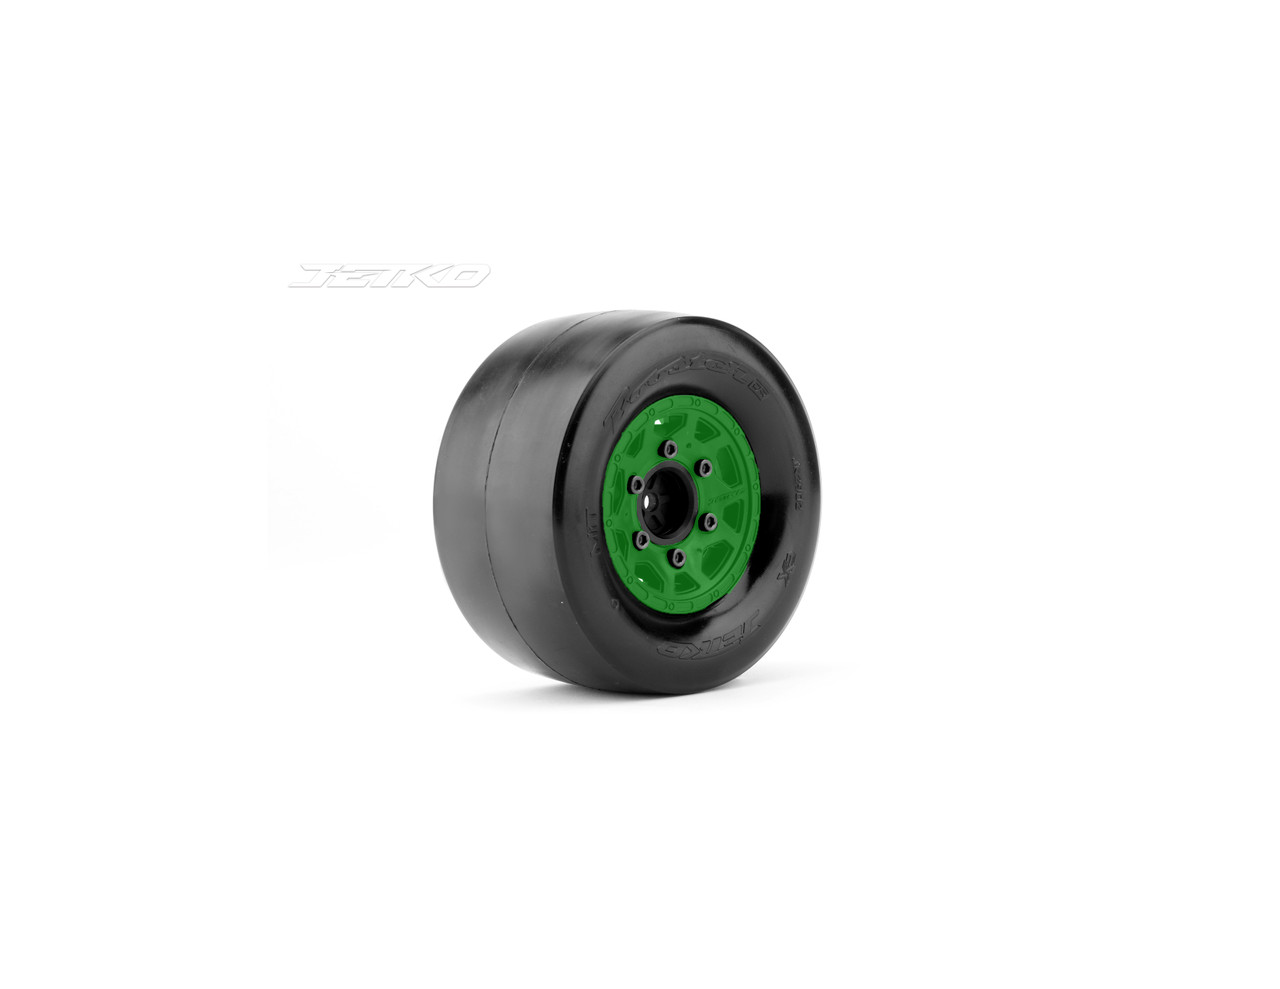 Jetko 1/10 DR Booster RR Narrow Rear Tires, Ultra Soft, Belted, Mounted on Green Claw Rims, 0 Offset